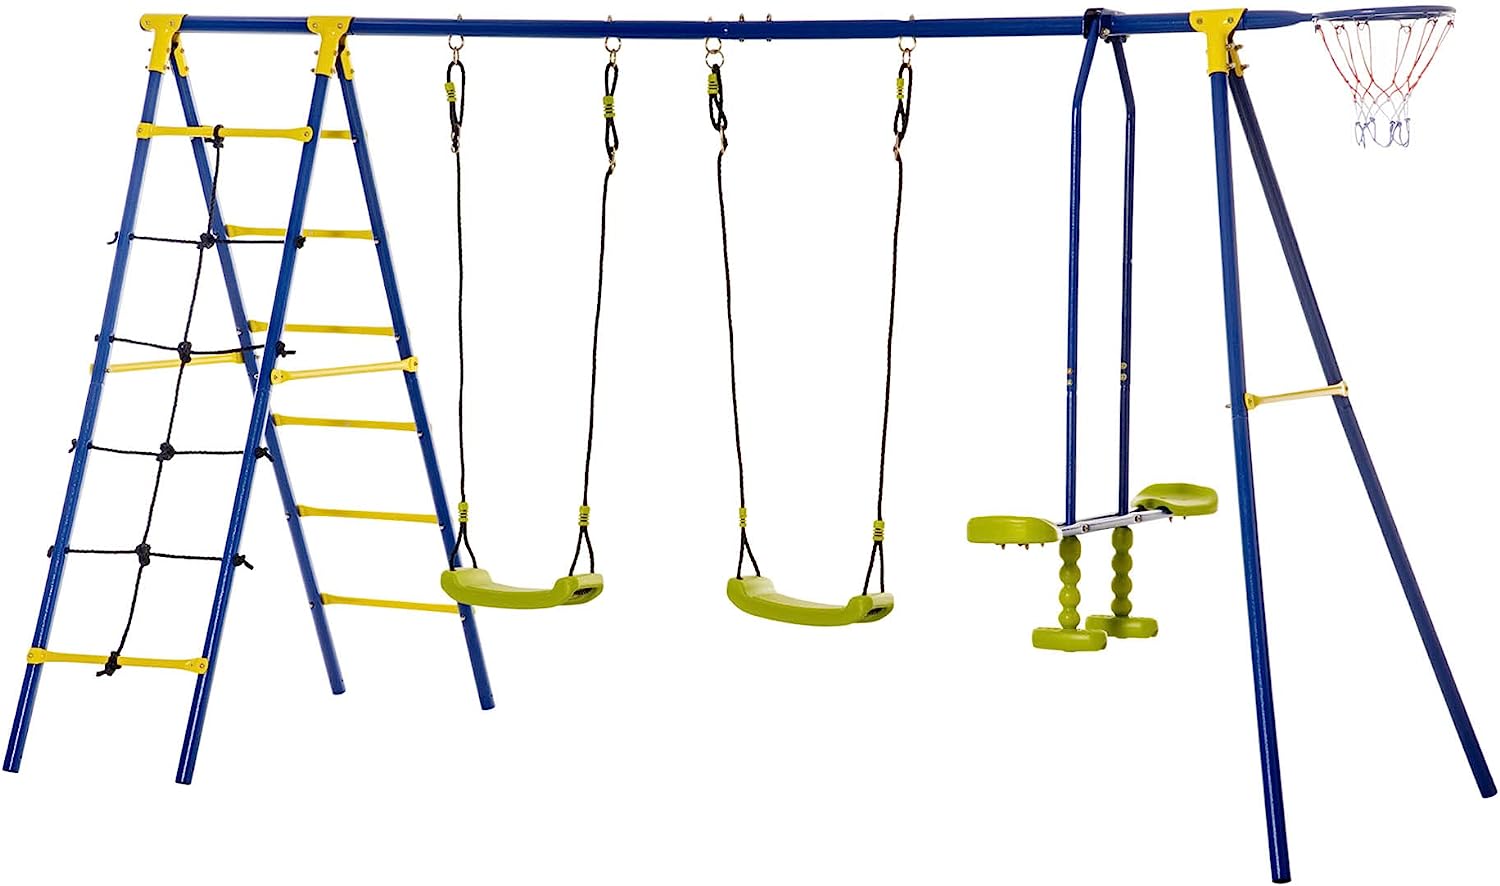 Outsunny Kids Metal Swing Set for Backyard, Outdoor [...]